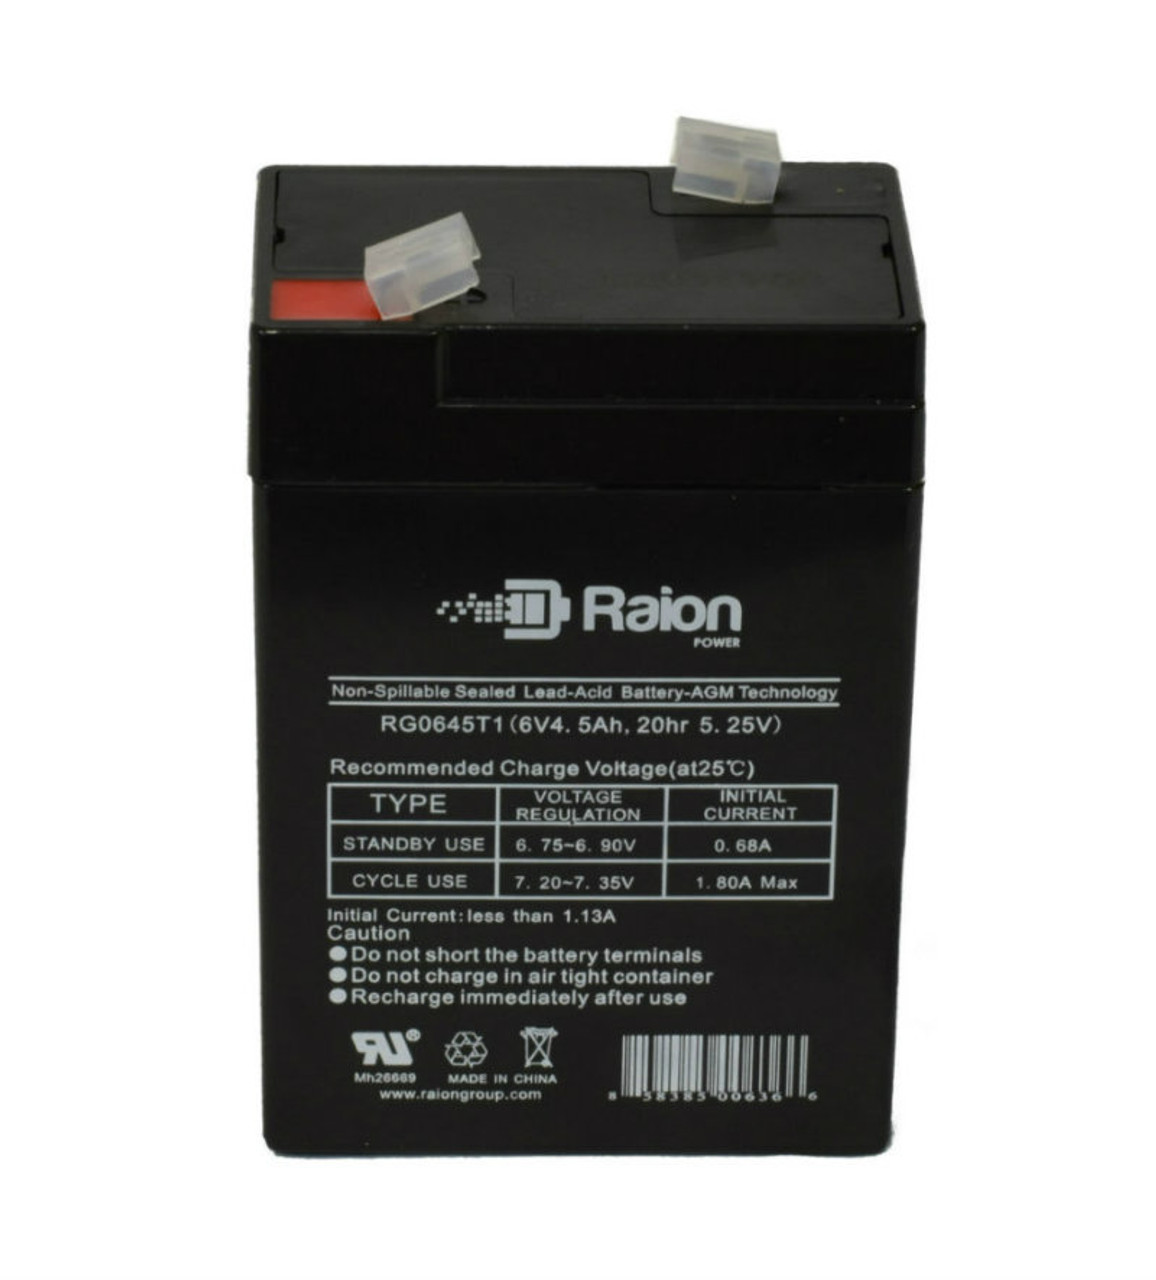 Raion Power RG0645T1 Replacement Battery Cartridge for Dorcy Spotlight 41-1084